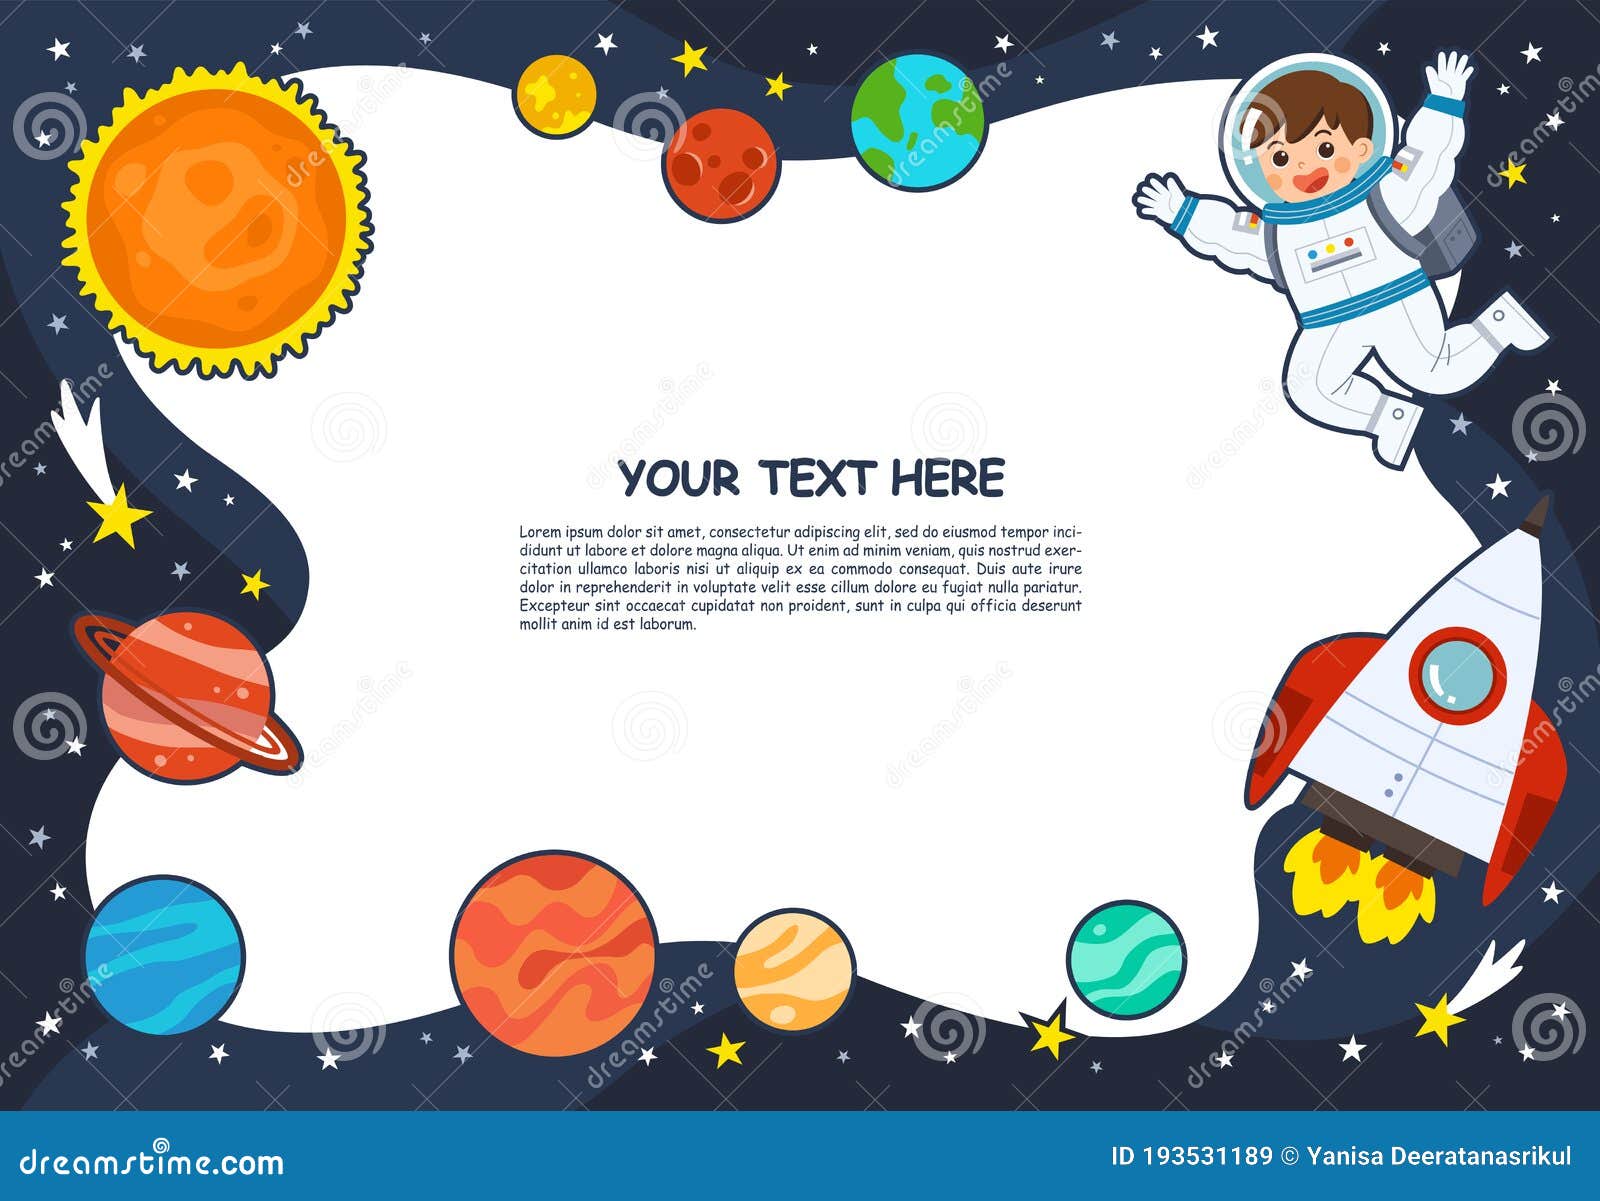 Astronaut In Cosmos With Spaceship Stars And Planets Spaceman In Galaxy Space Scenes Stock Vector Illustration Of Planet Design